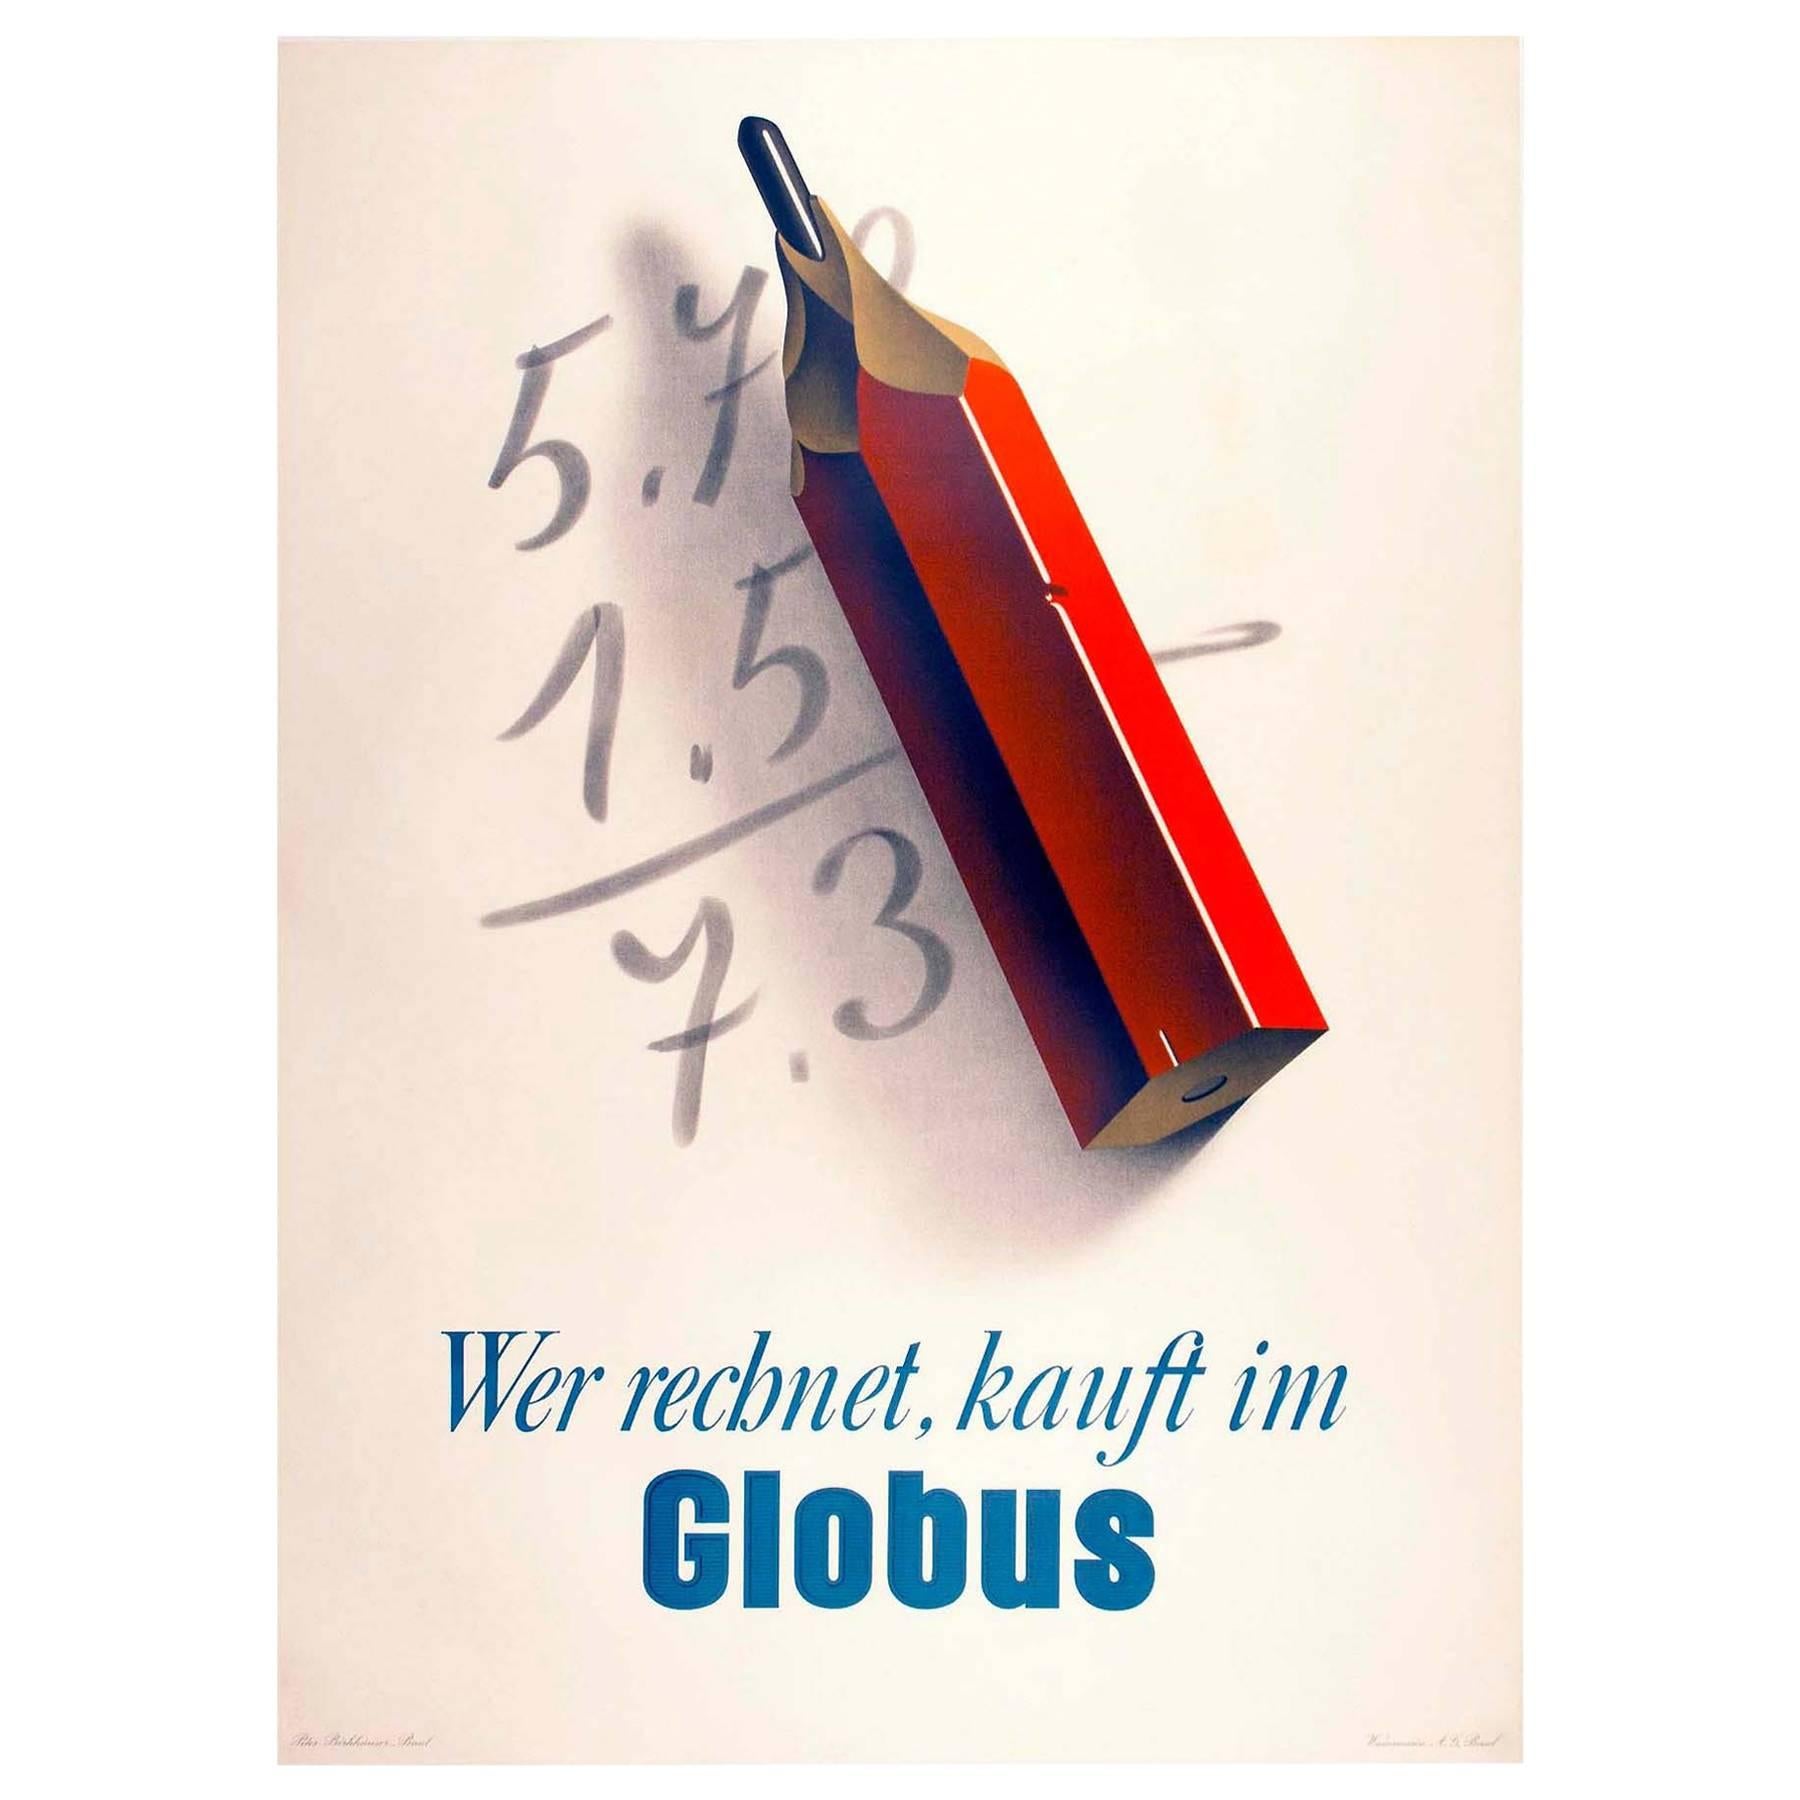 Original Swiss Poster Ad for Globus Department Store For Sale